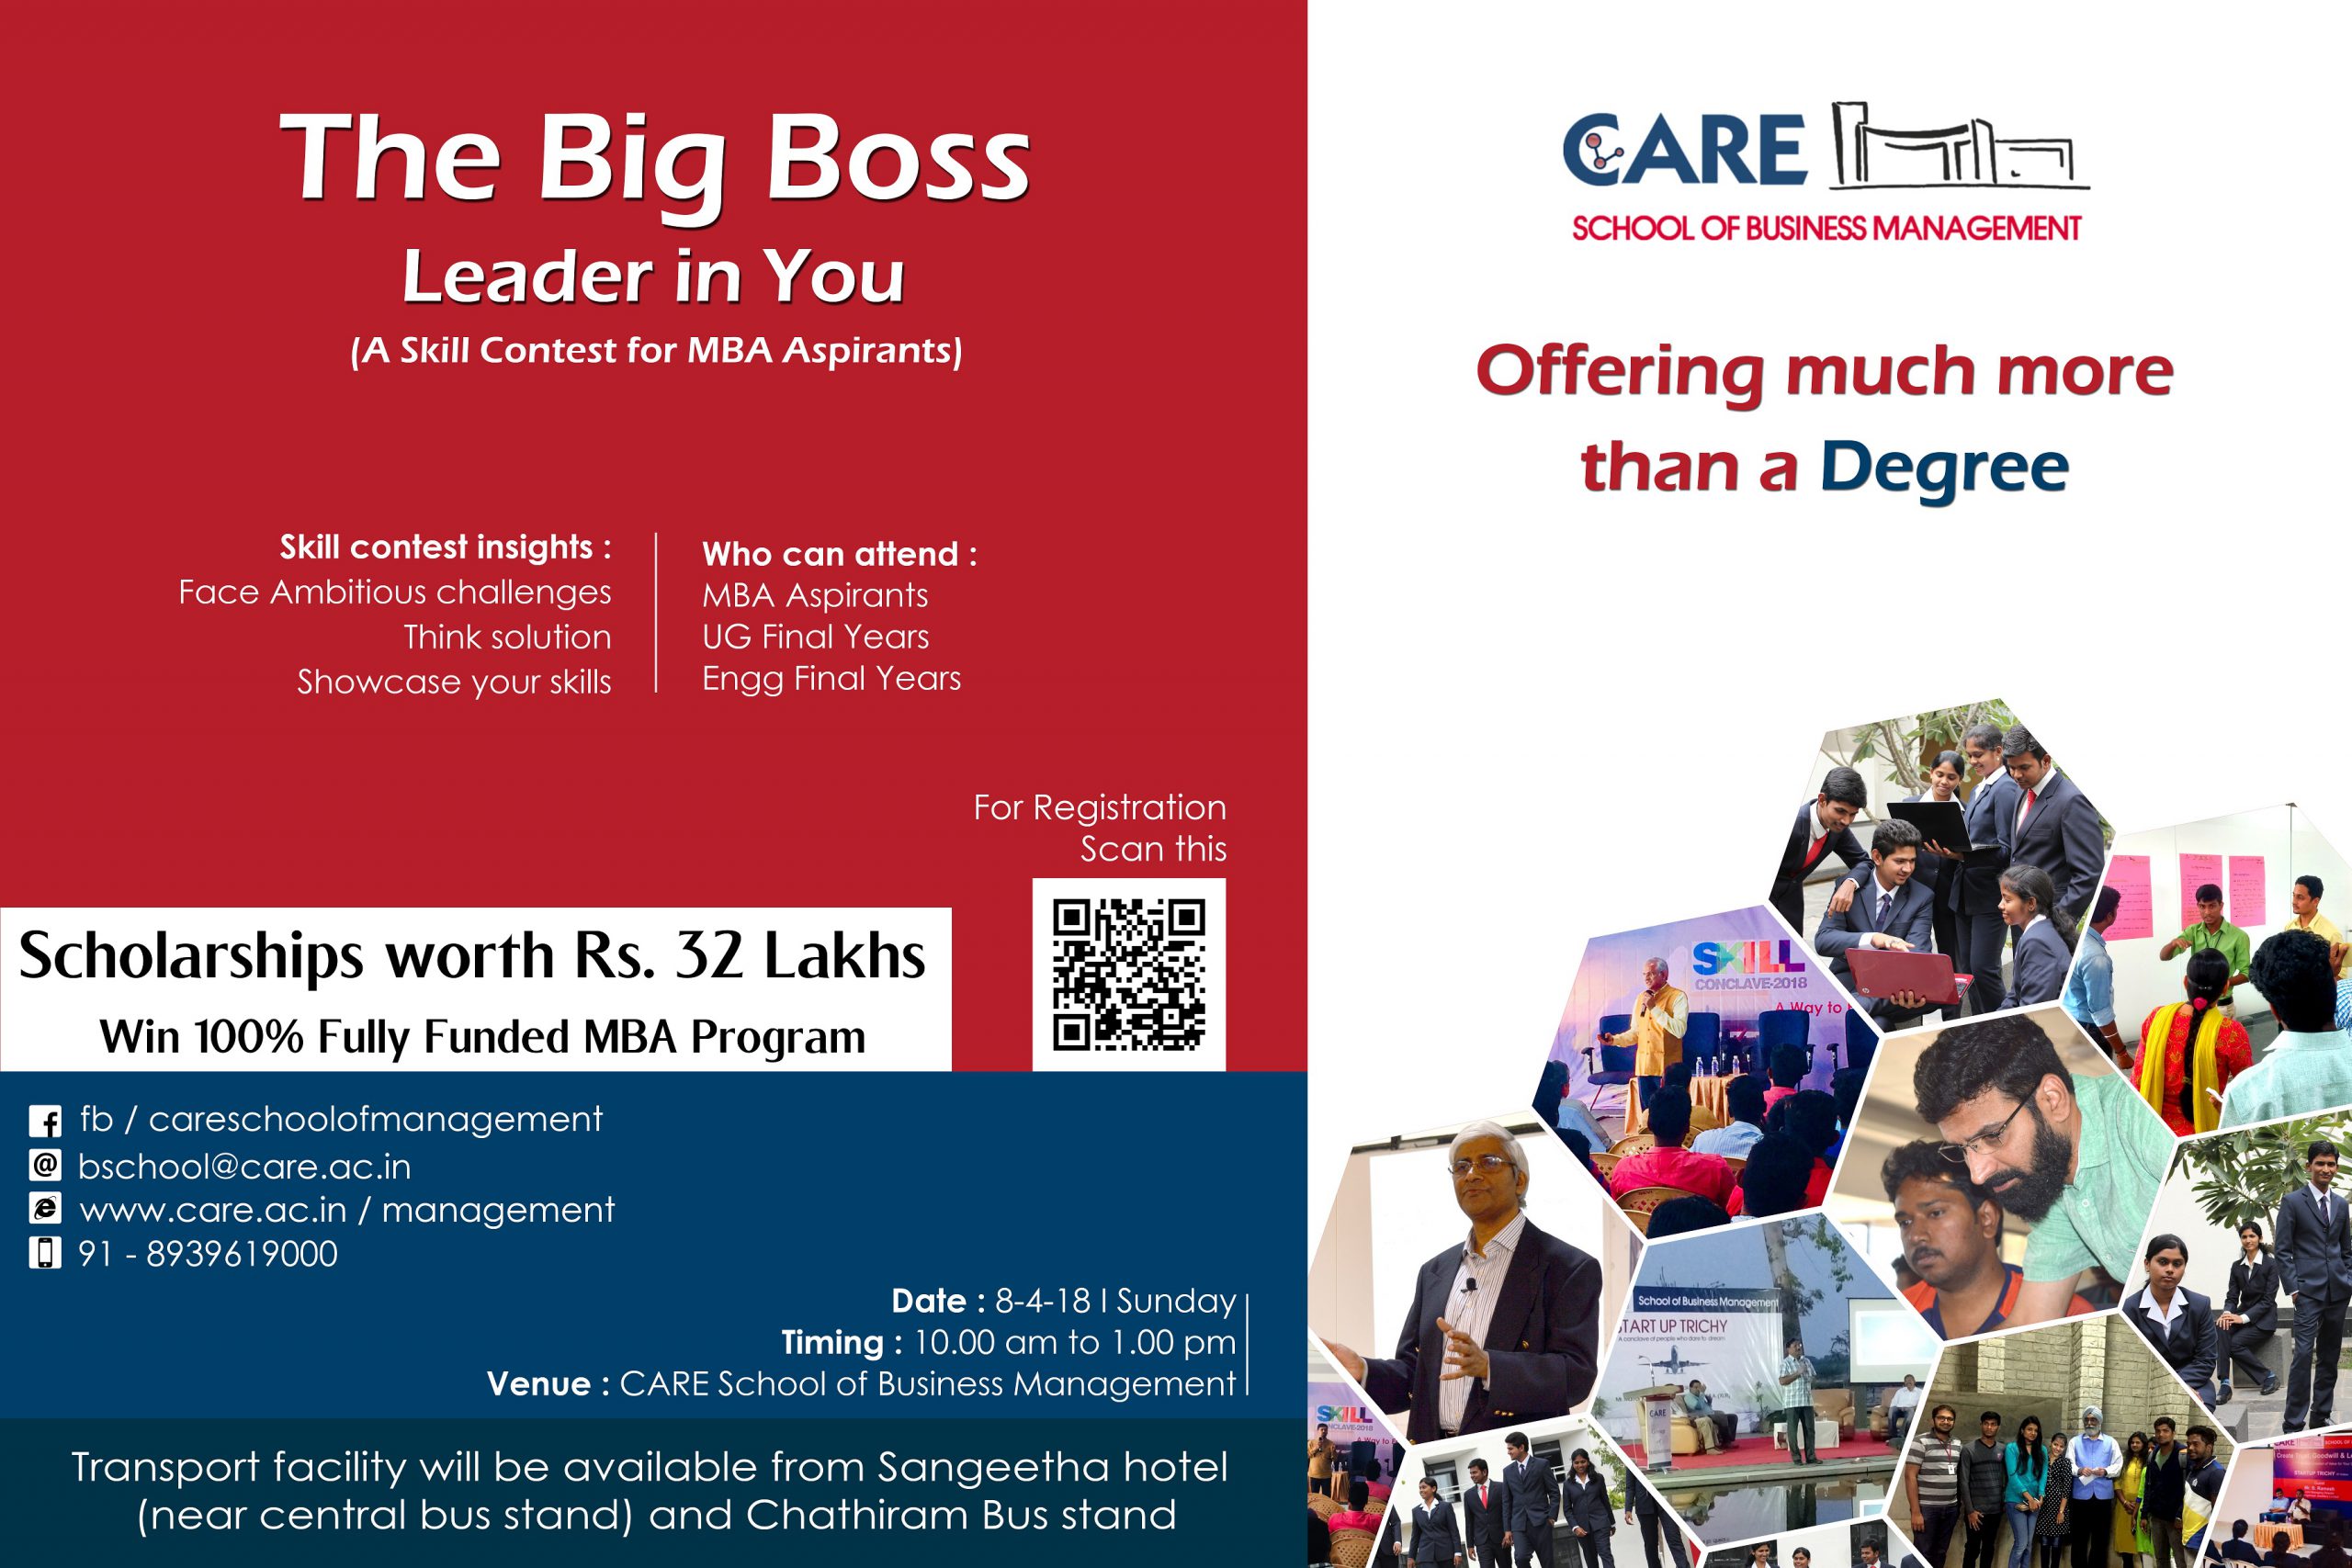 The Big Boss – Leader in You